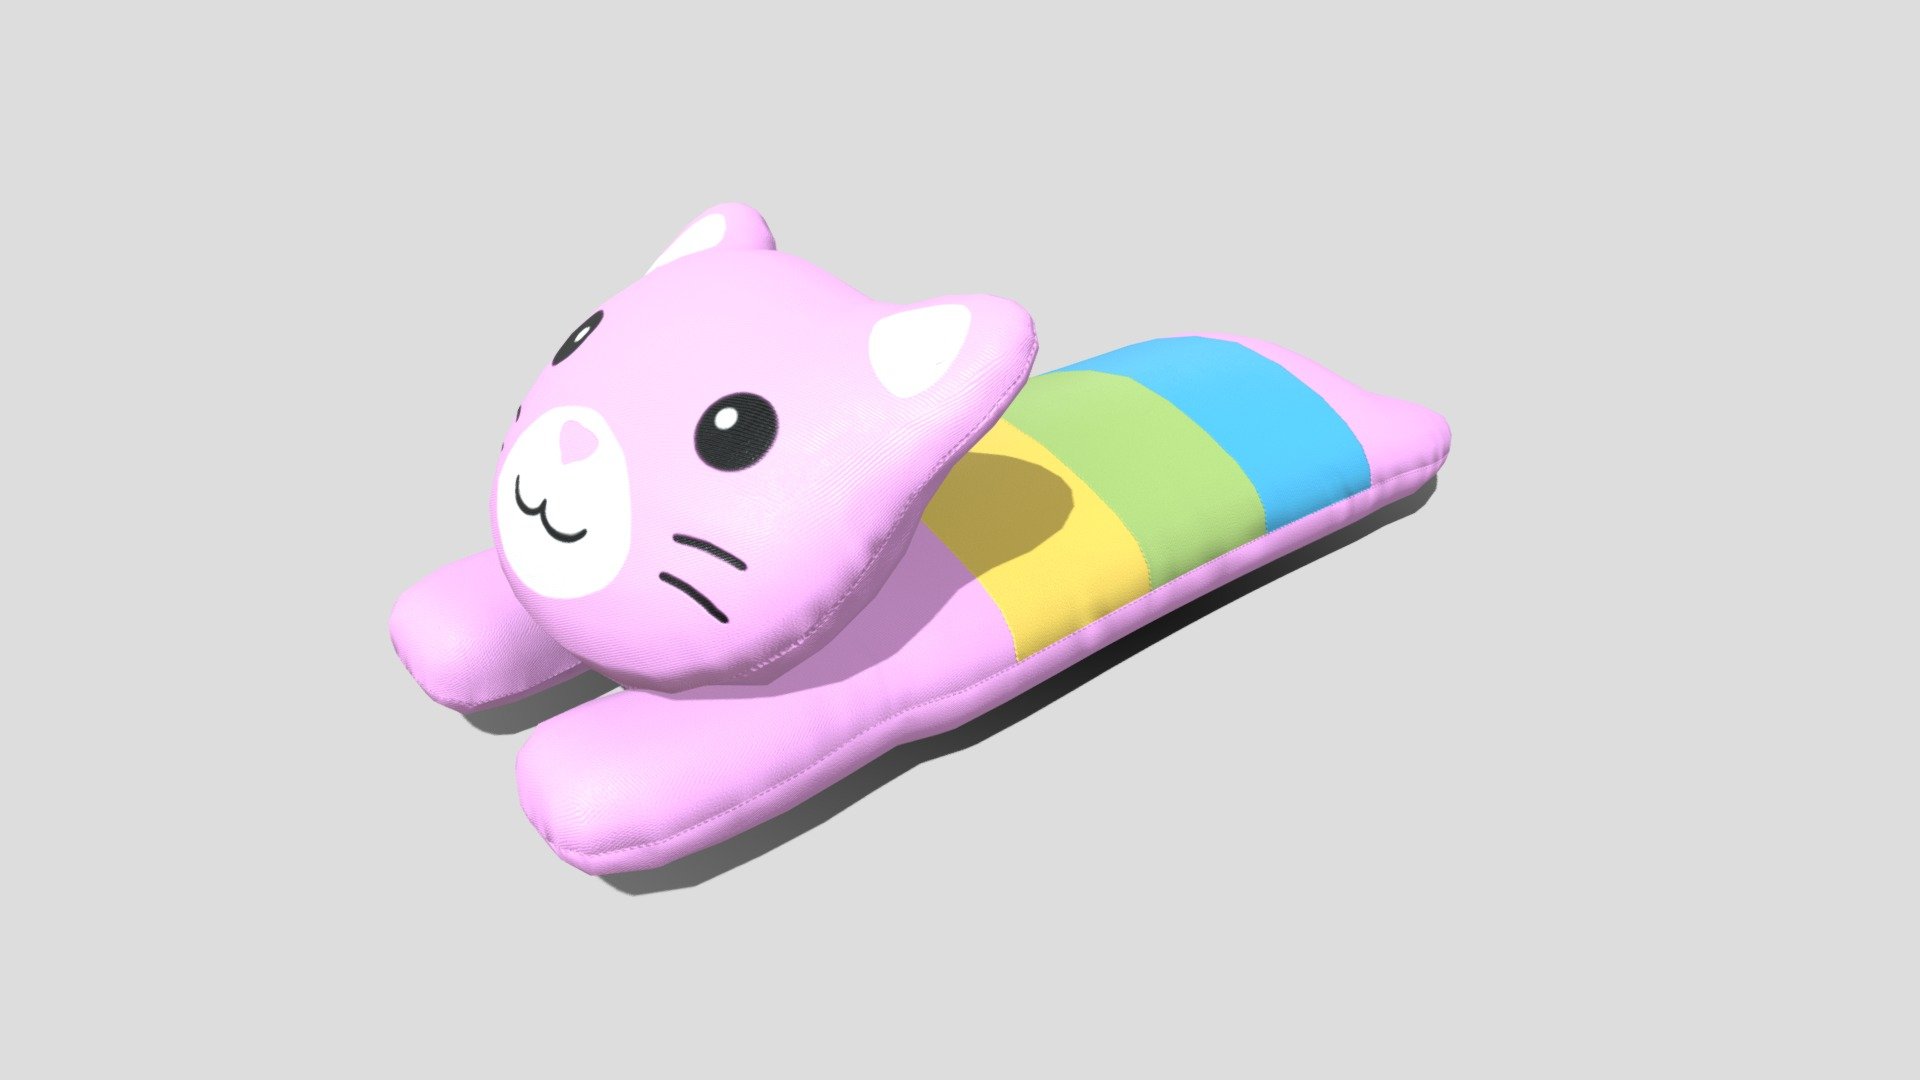 I made a character pillow using a blender program. This pillow, shaped like a cute pink cat, will be great for decorating your bed 3d model